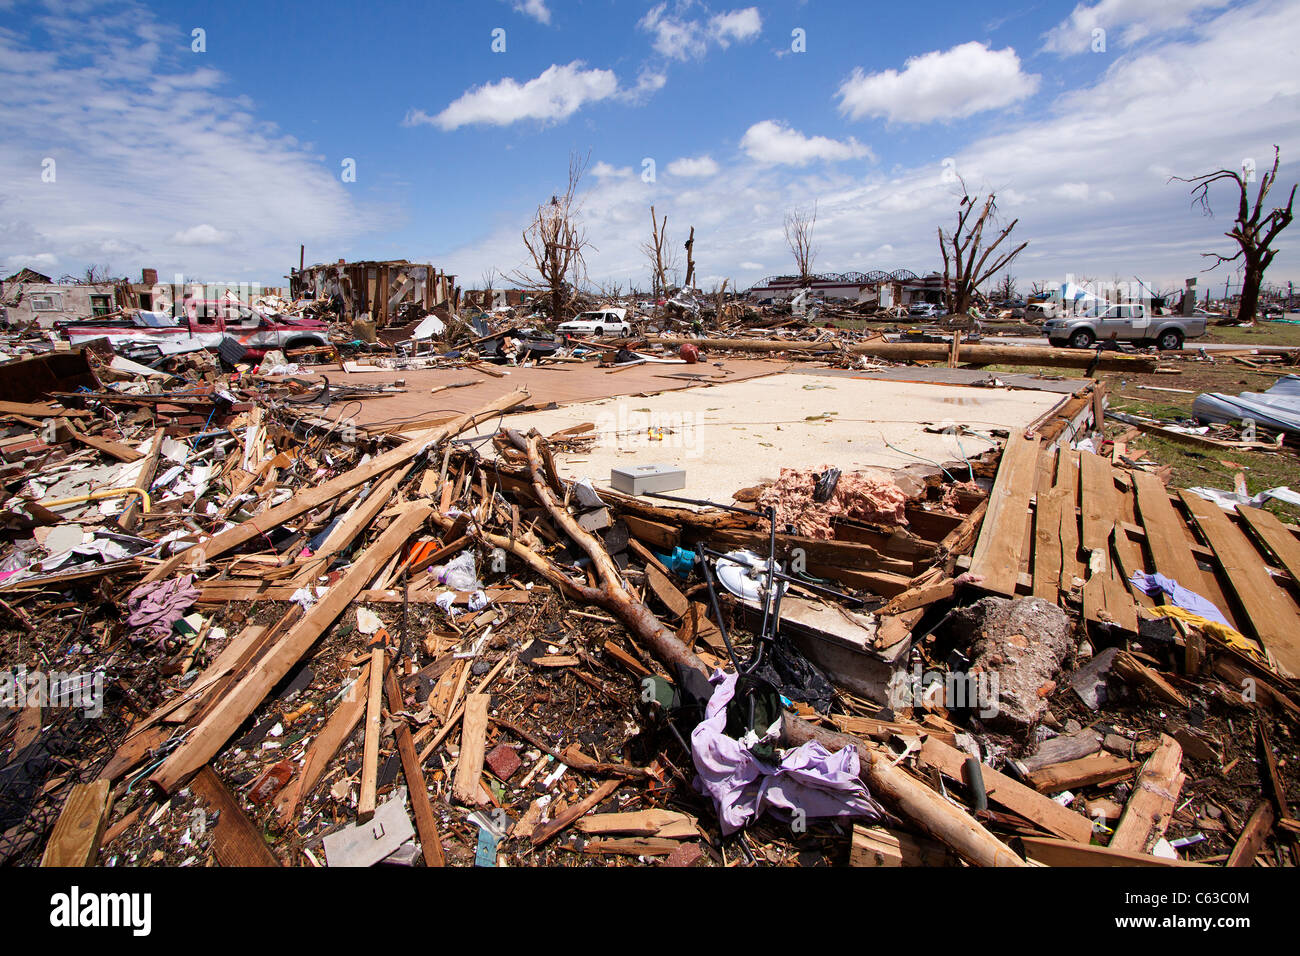 a-home-swept-entirely-off-of-its-foundation-in-joplin-missouri-may-C63C0M.jpg